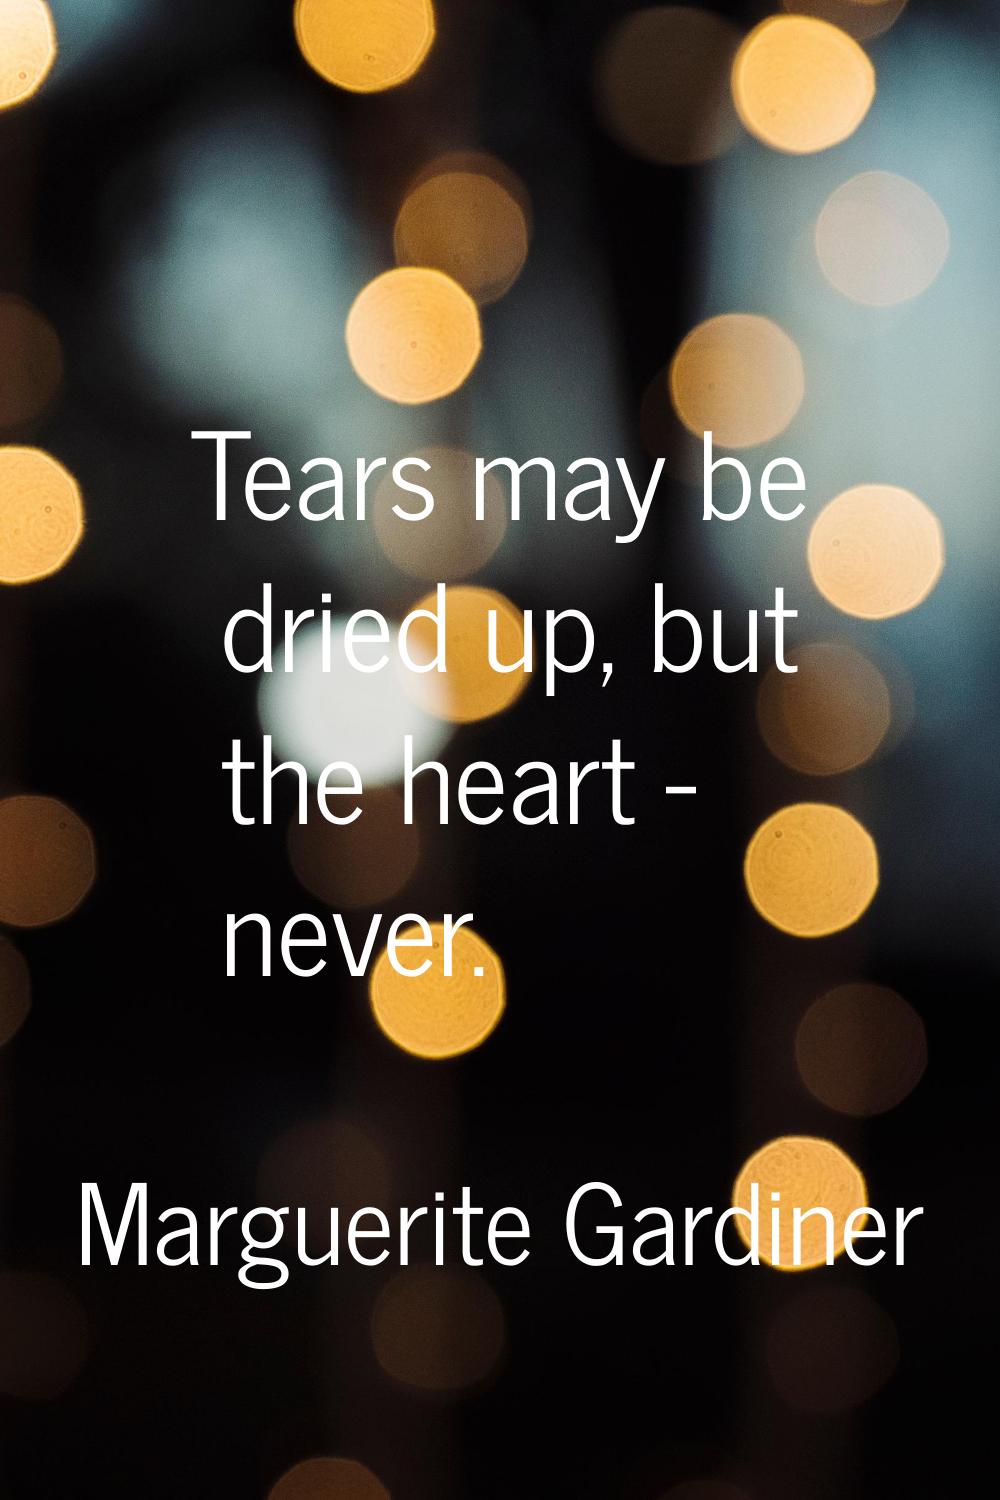 Tears may be dried up, but the heart - never.